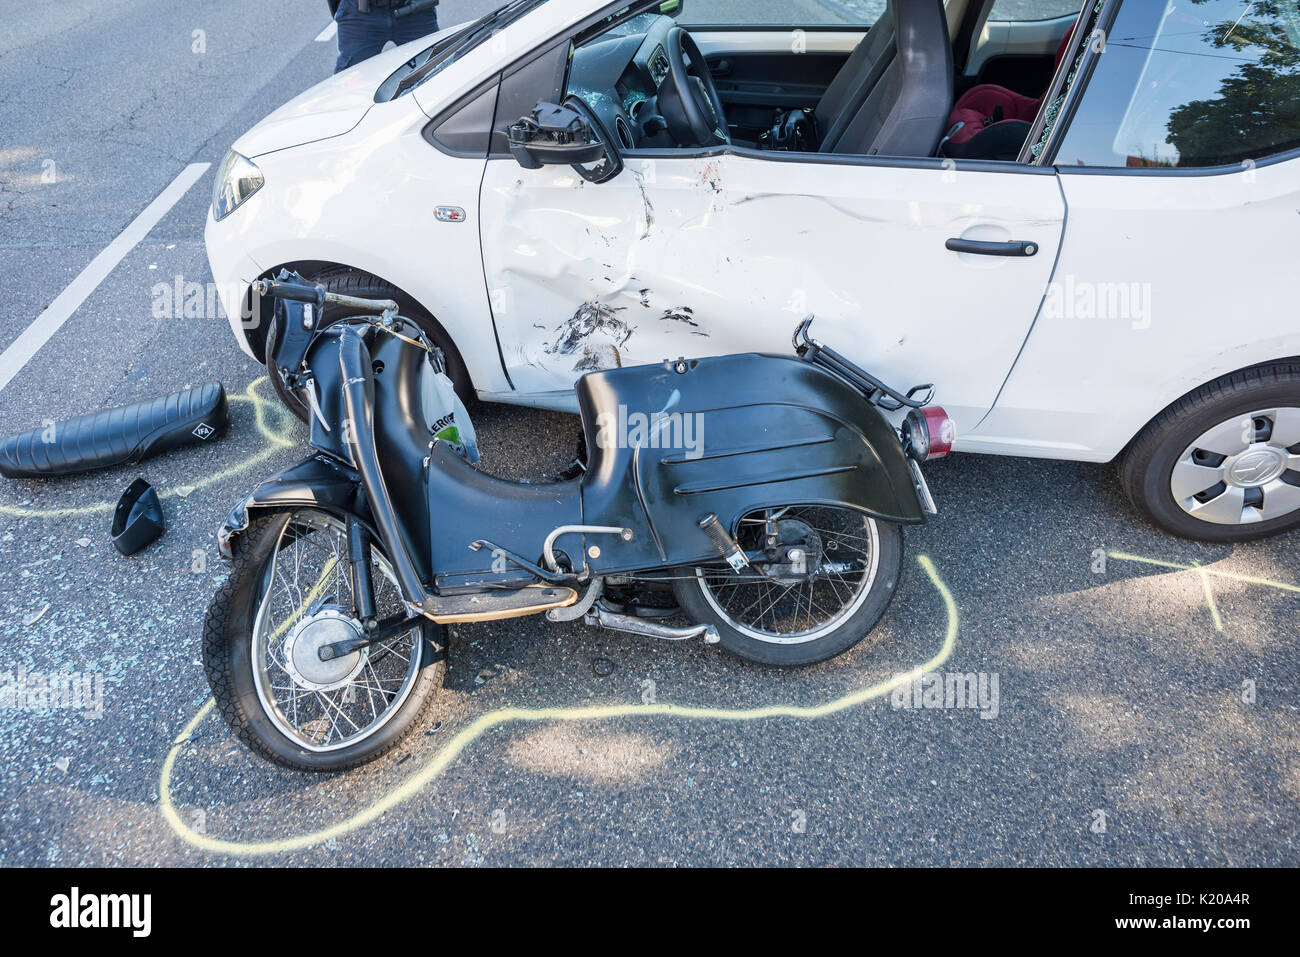 Heavy road accident, Simson scooter crashing in car, policewoman at the accident, Germany Stock Photo